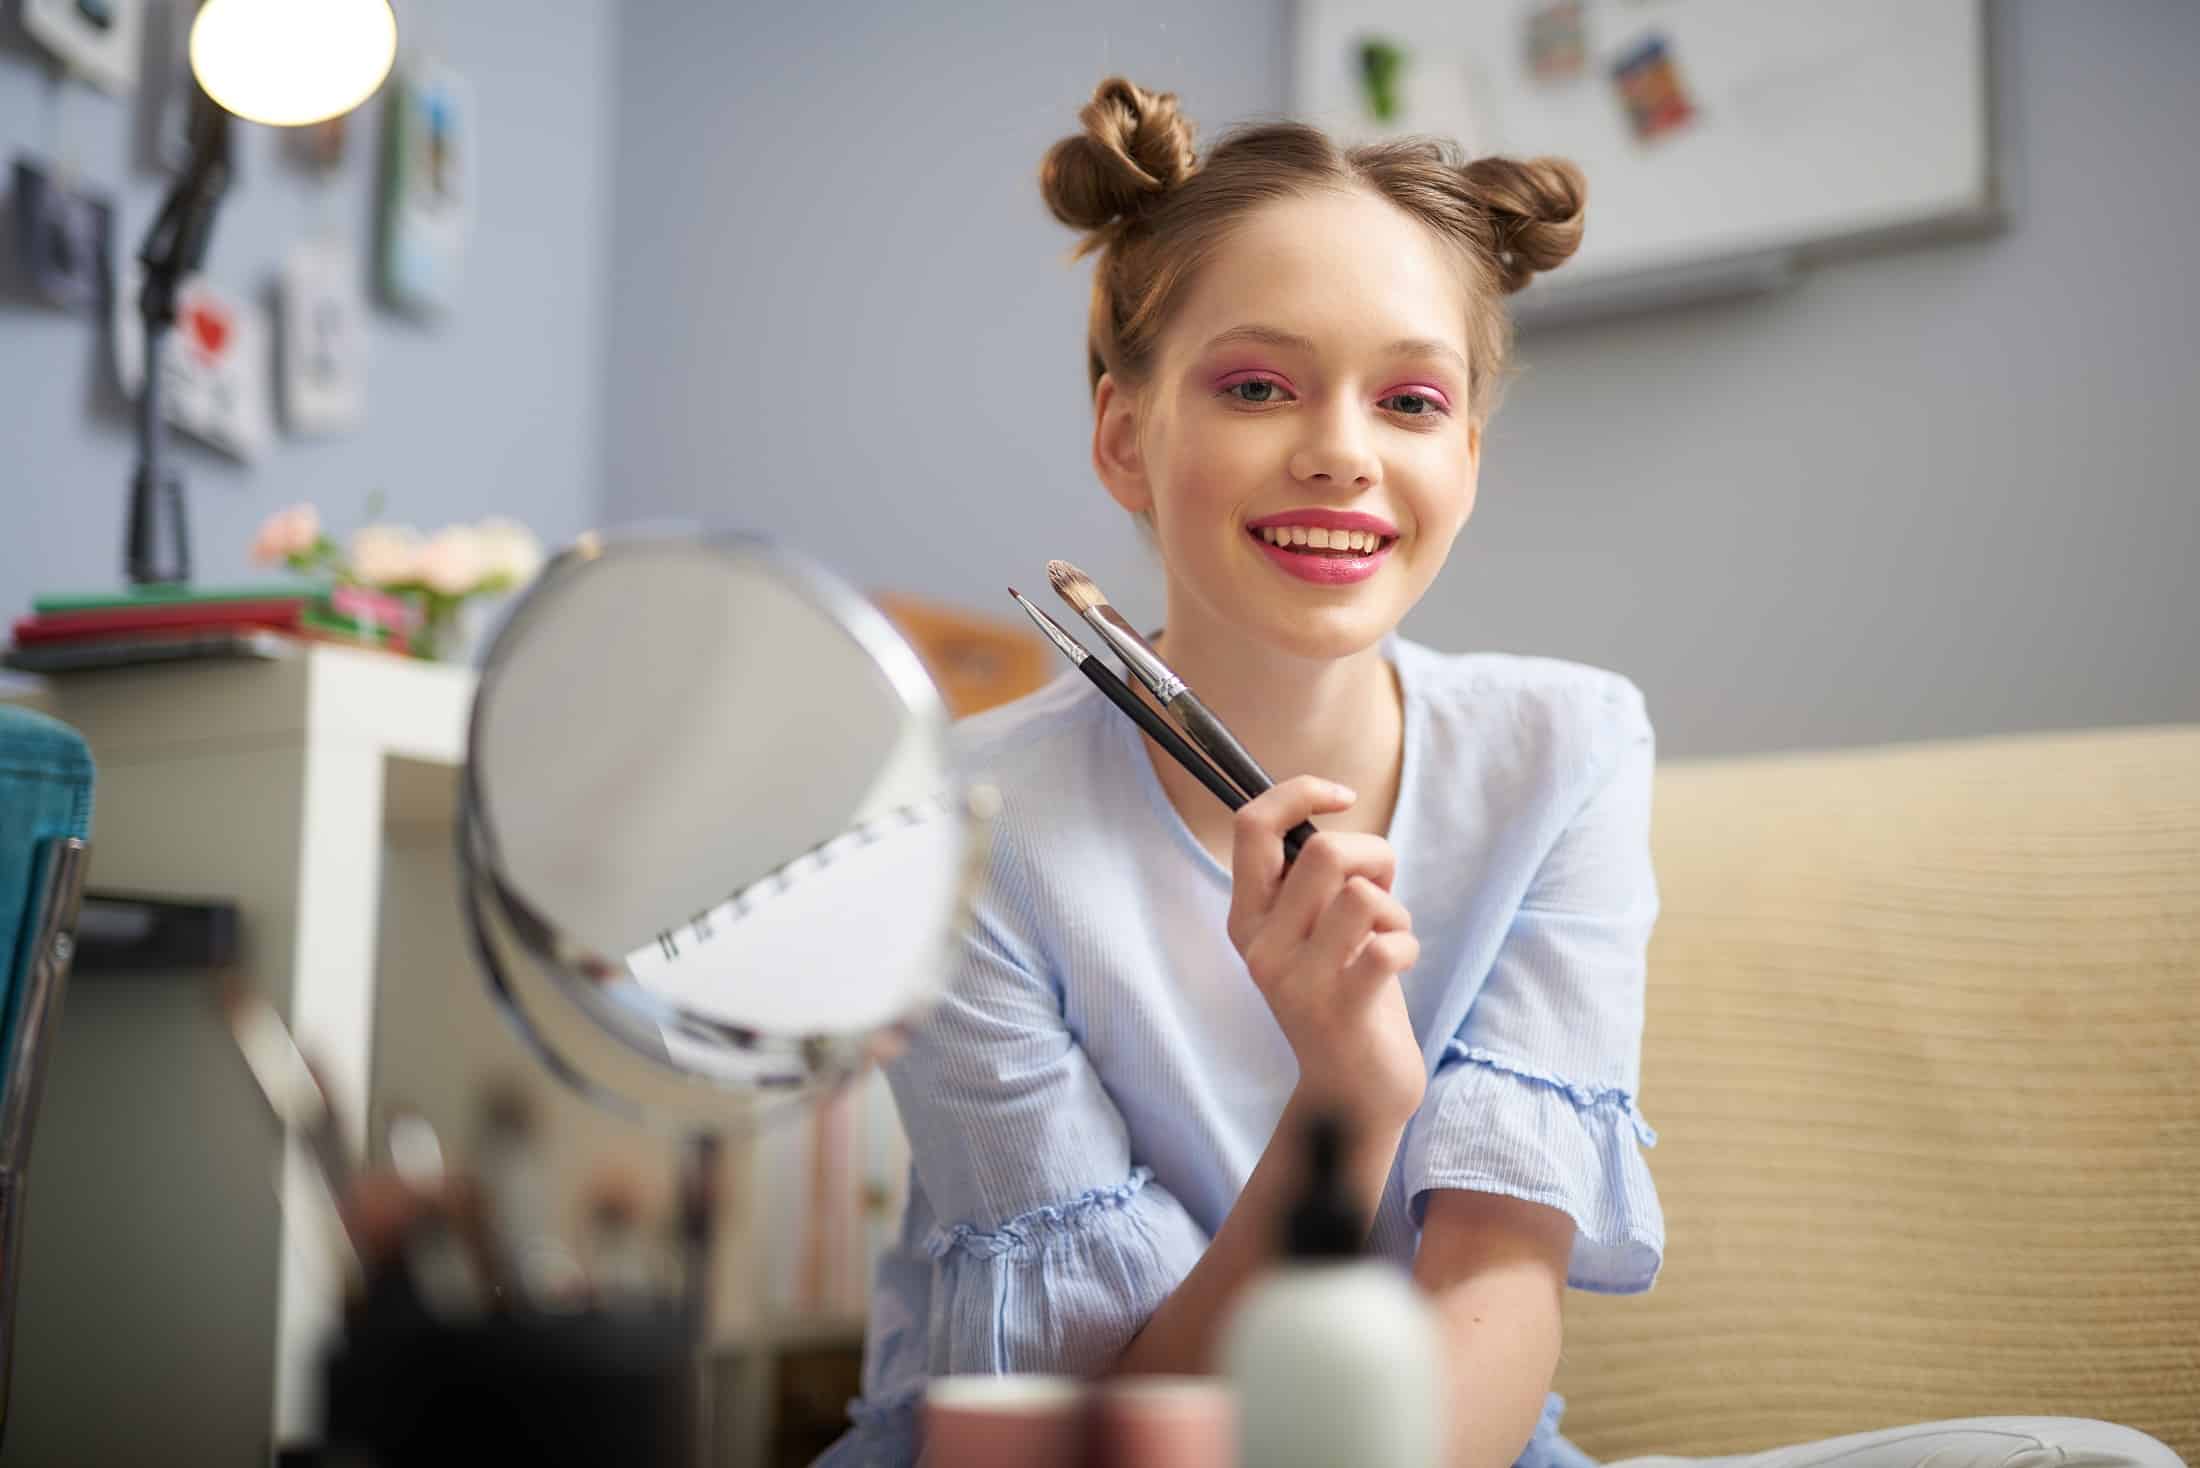 Teenage makeup – do you know when it’s acceptable and what rules you should set?